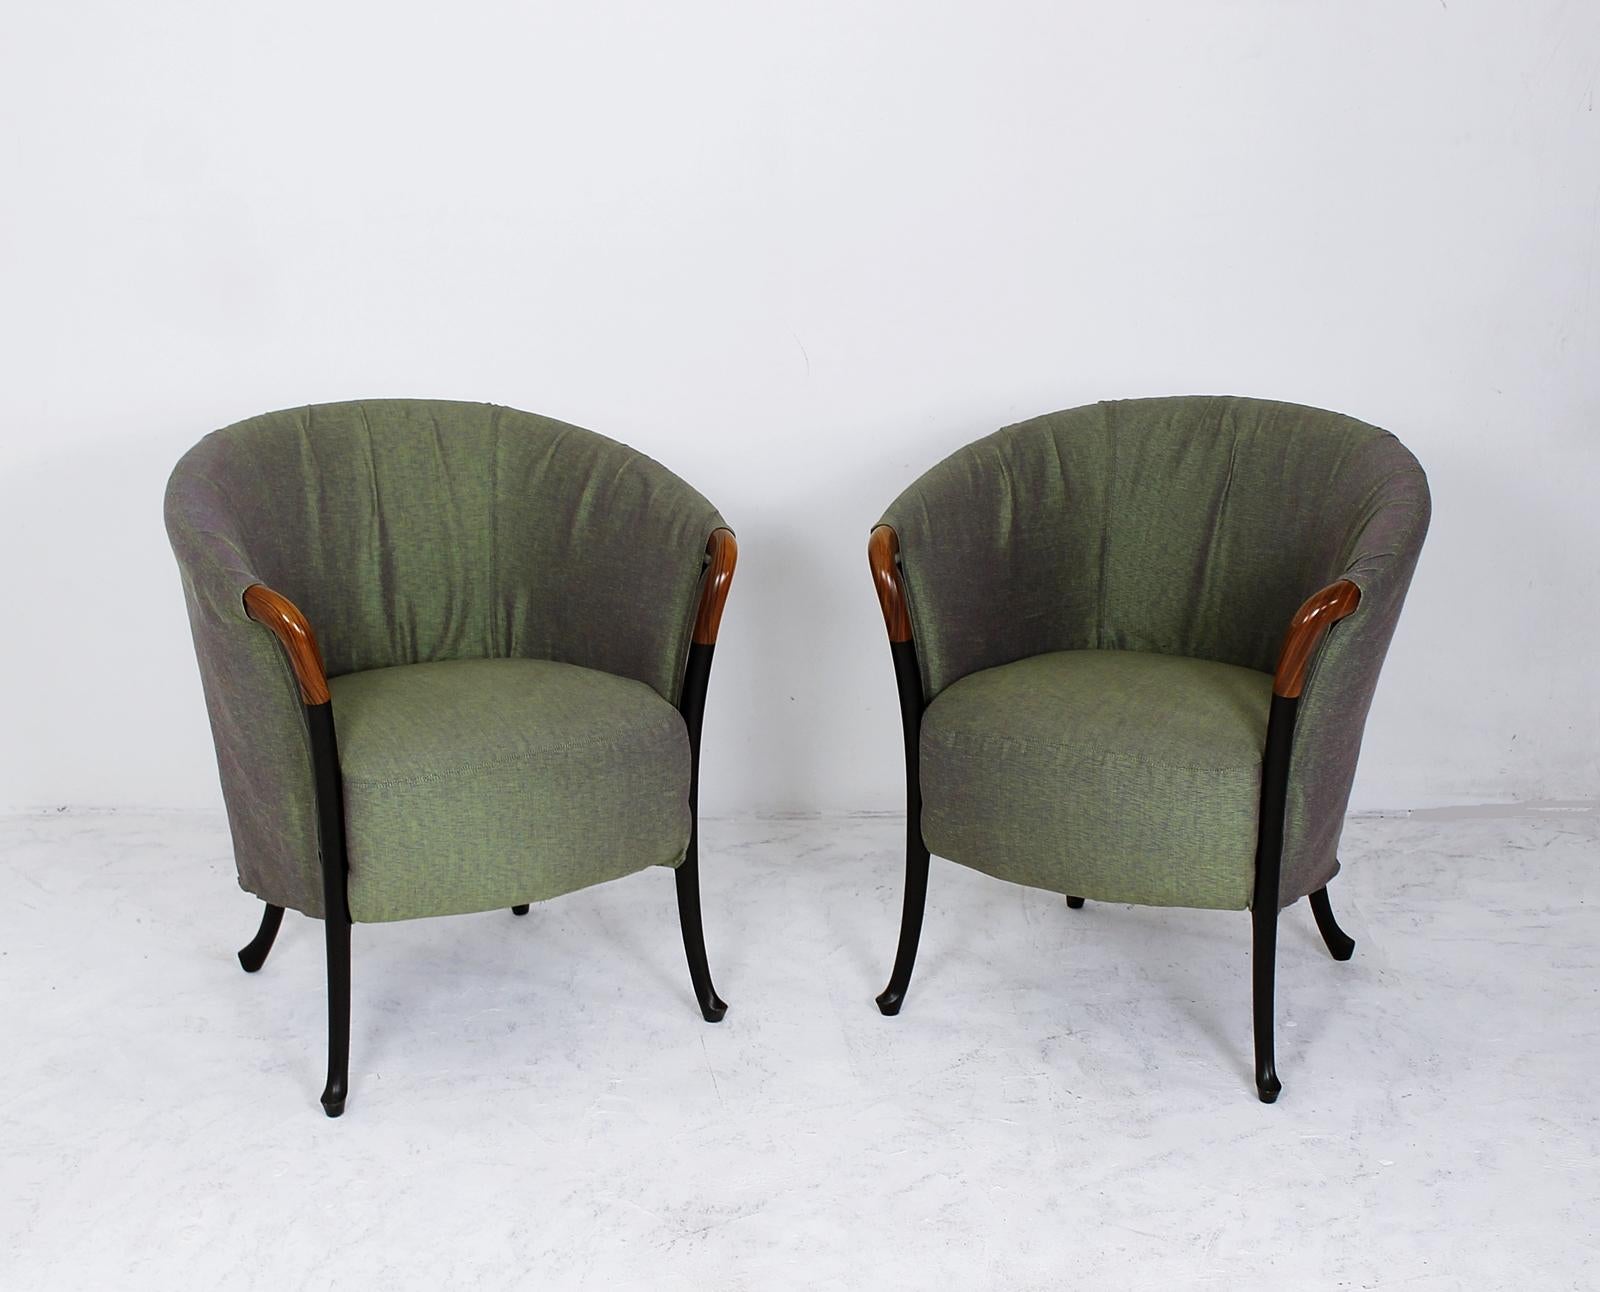 Umberto Asnago pair of armchairs model Progetti 63230, for Giorgetti. Designed 1987. Solid beech frame, painted black legs. Stained Pau ferro armrests. Non-deforming polyurethane seat and backrest, green/grey cloth covering, completely removable.